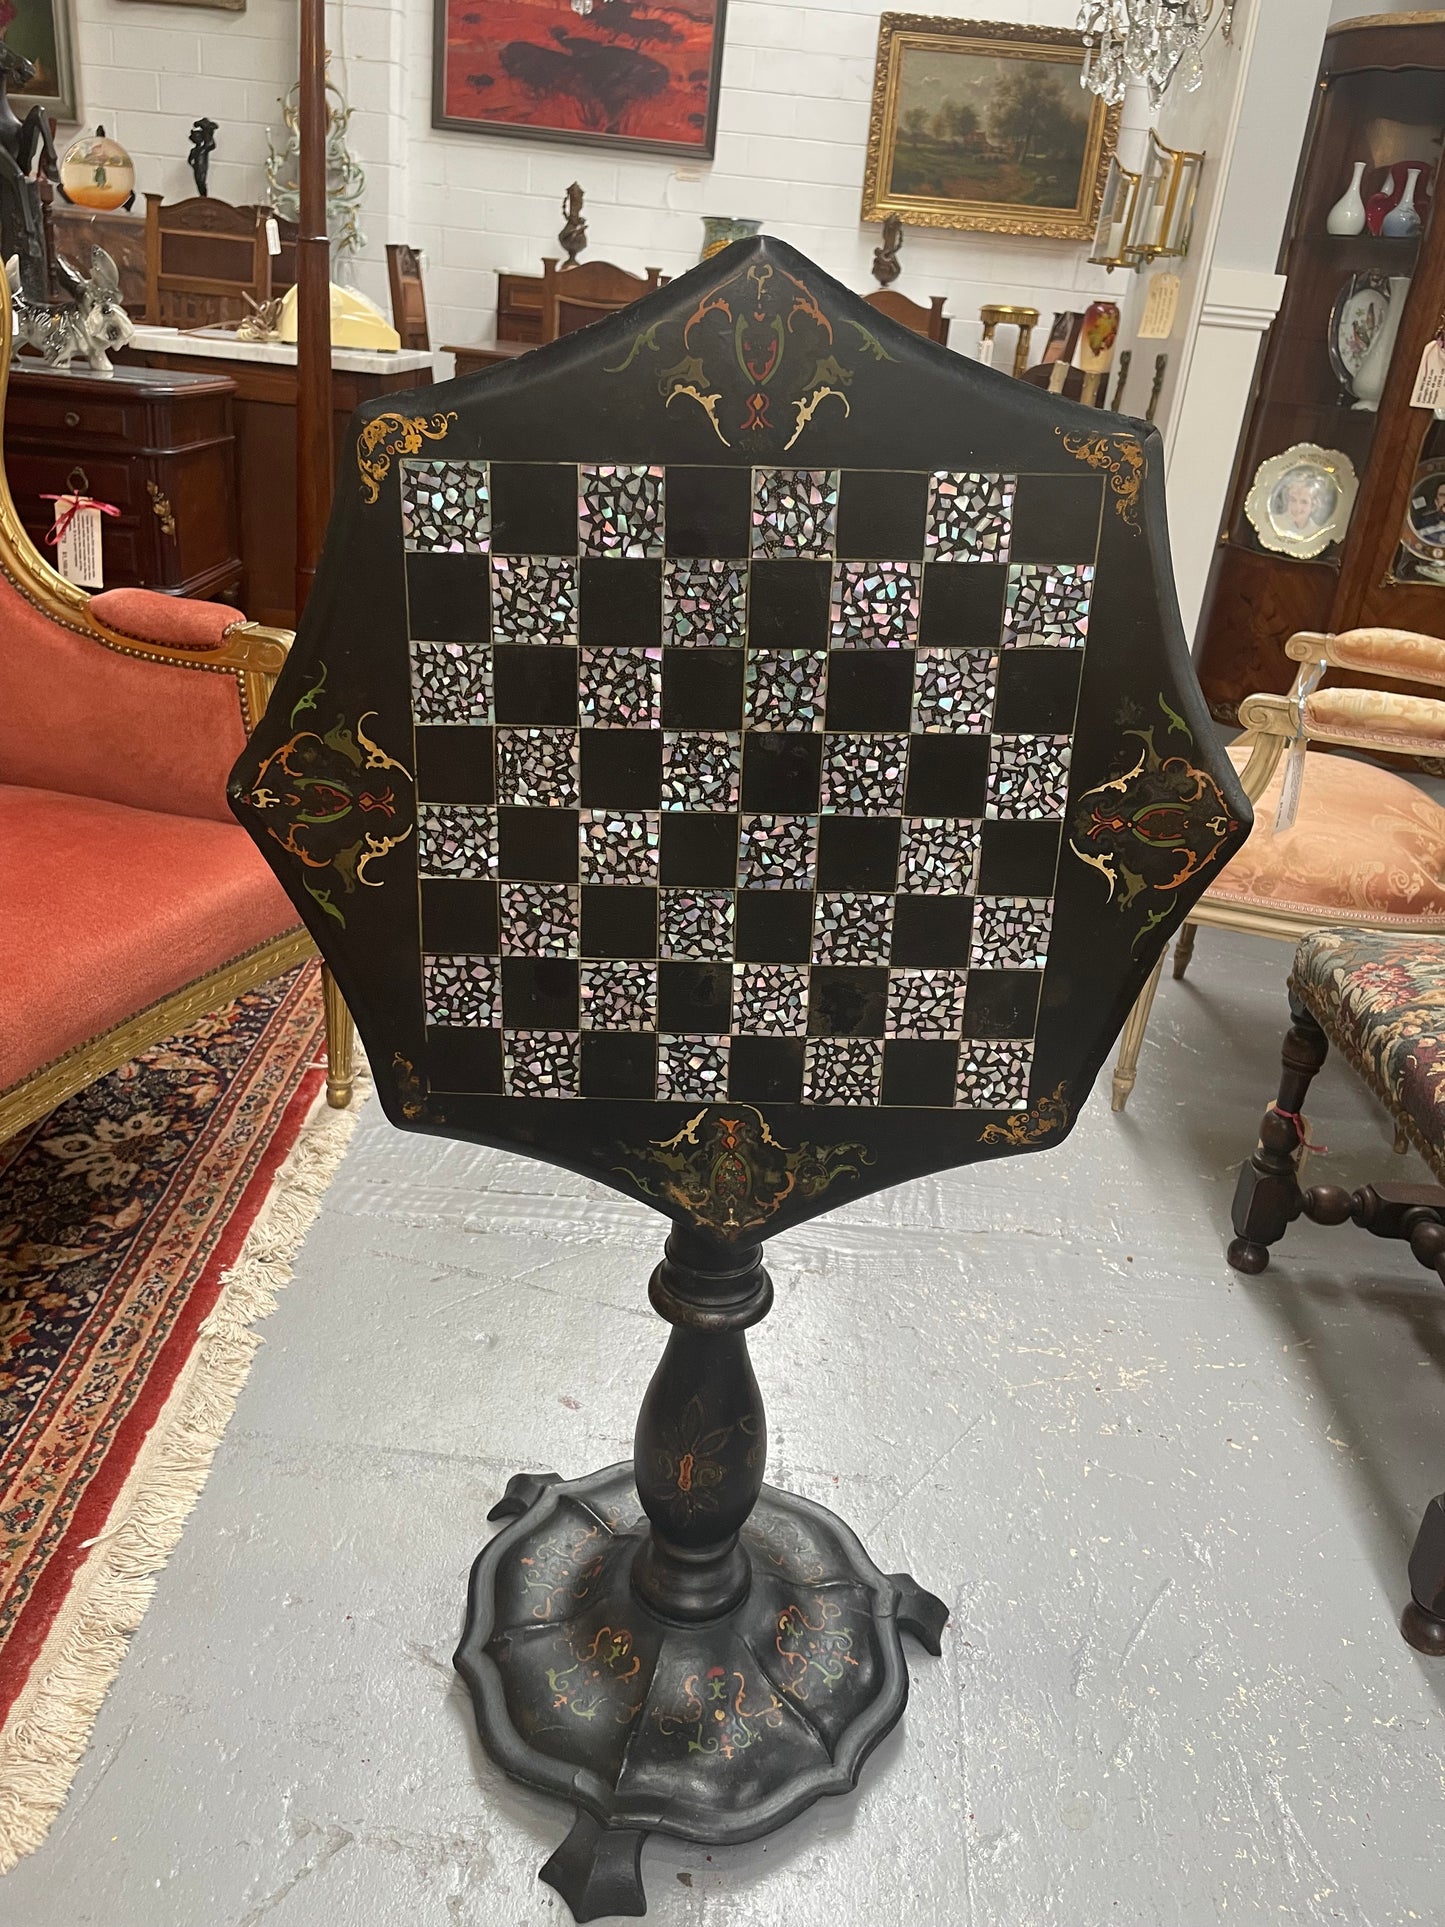 Fabulous William IV Papier Mache and Mother of Pearl tilt-top work table with lovely details. In good original condition. Please see photos as they form part of the description.